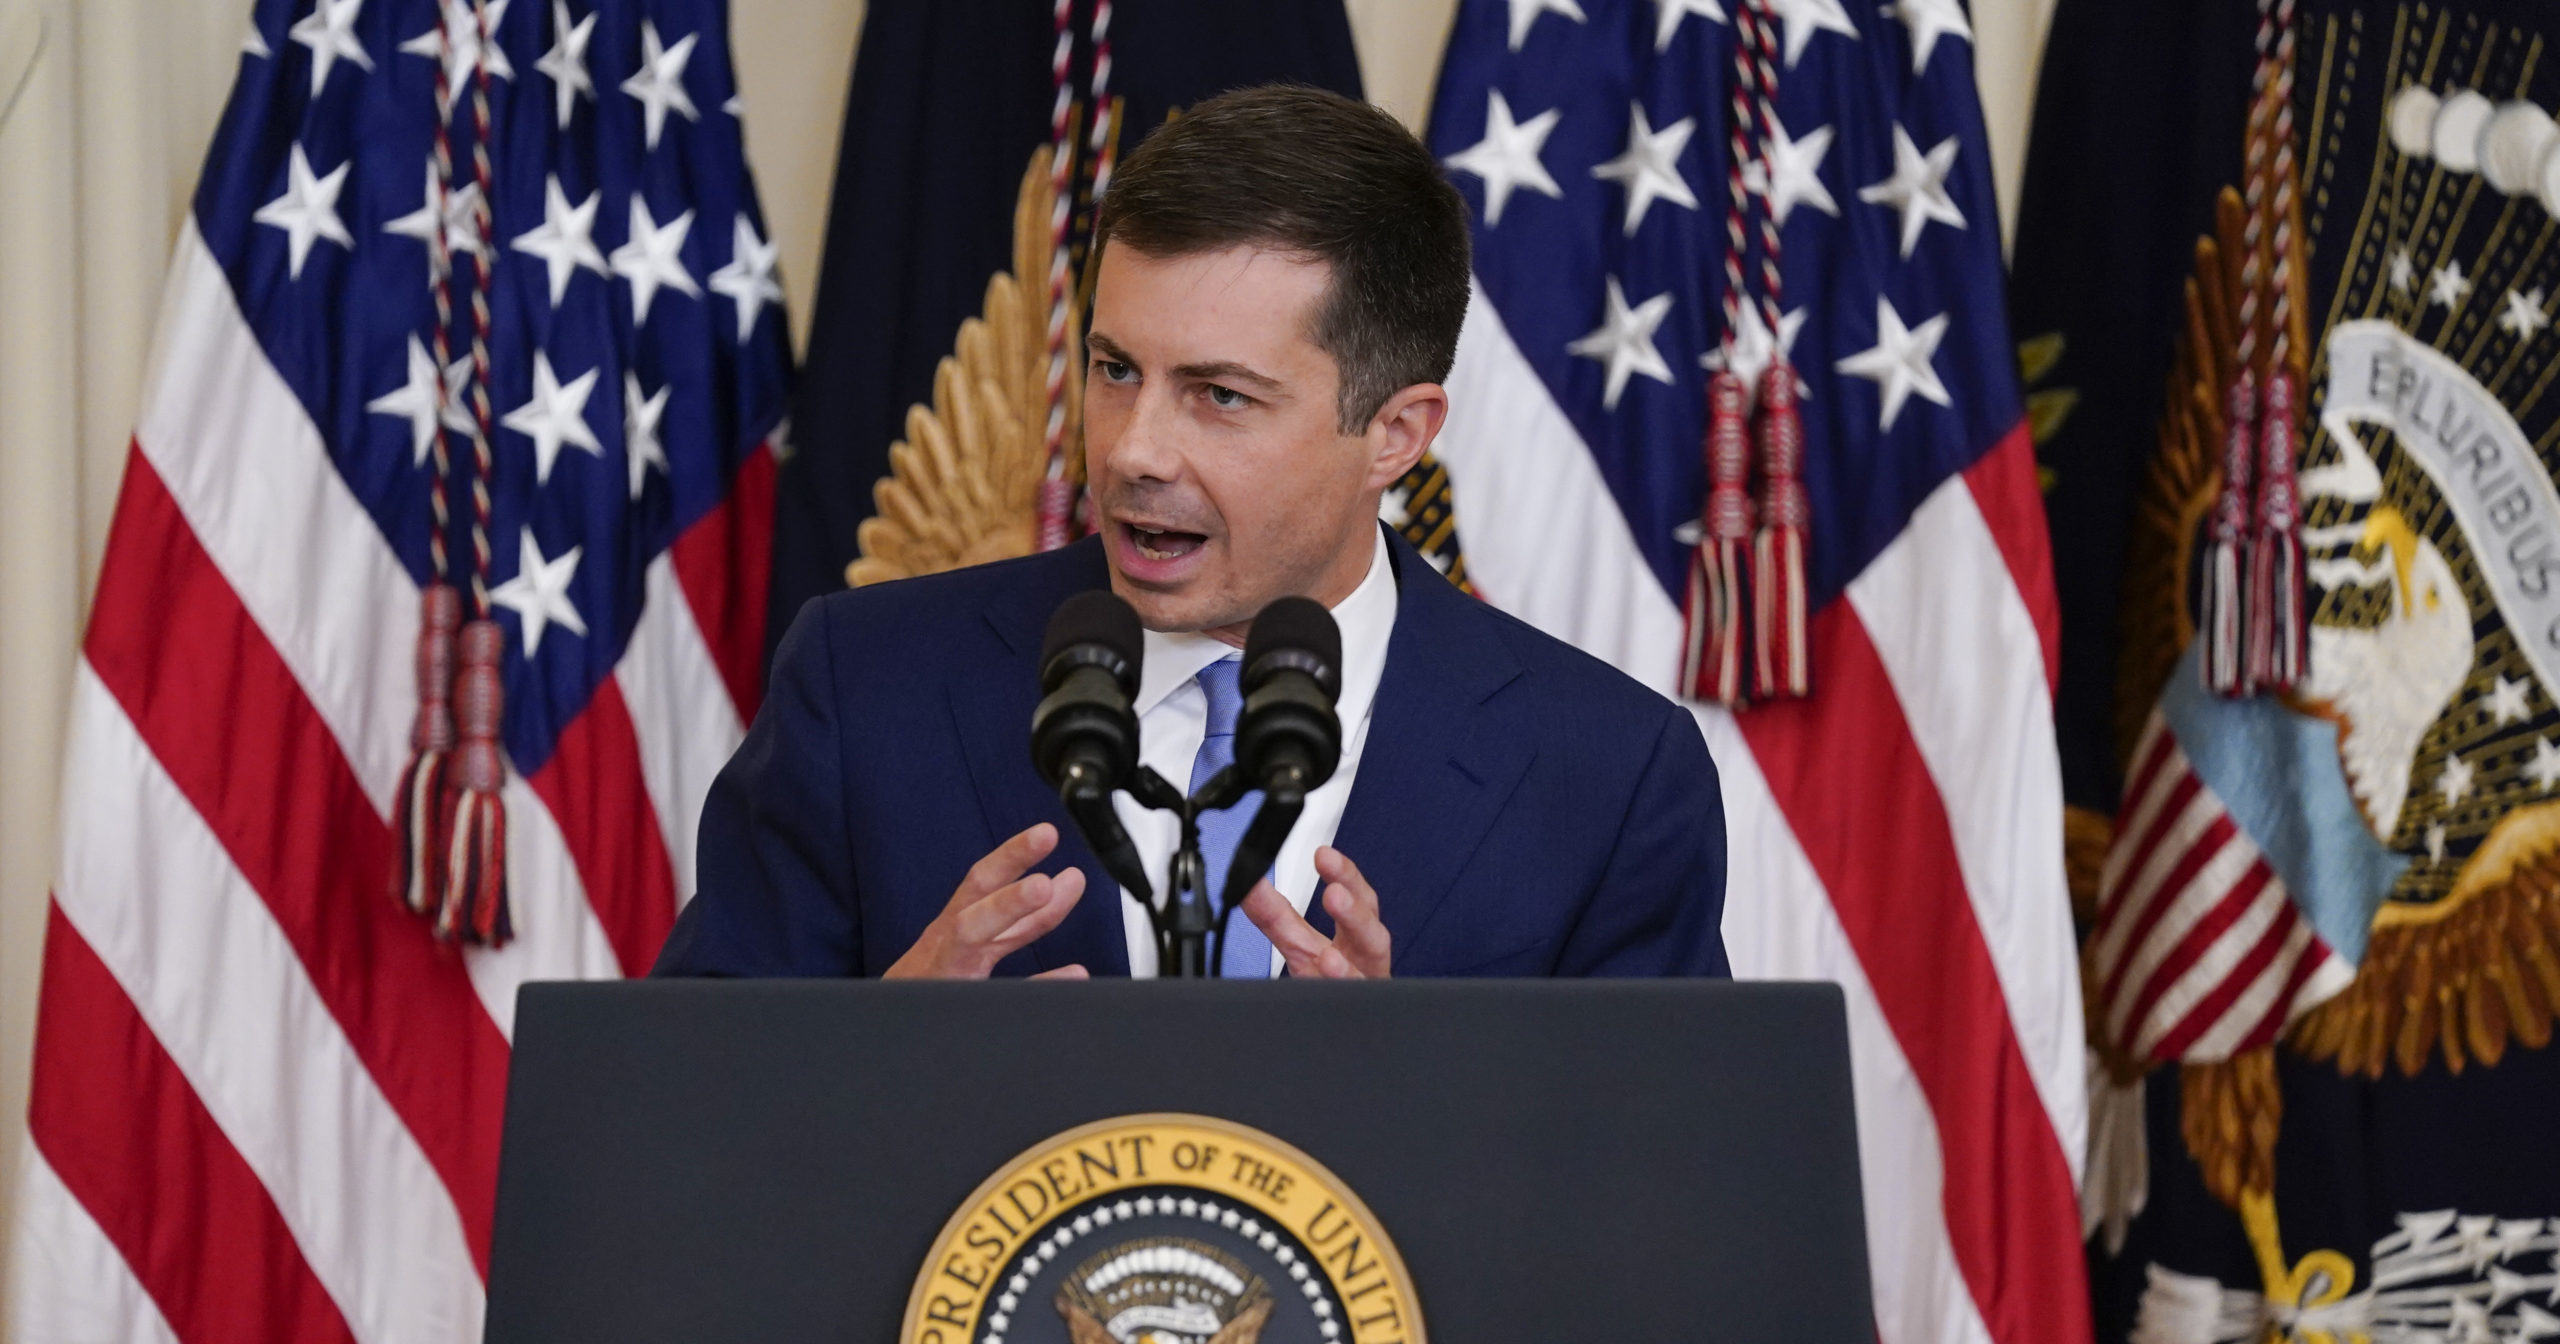 Transportation Secretary Pete Buttigieg speaks during an event to commemorate Pride Month, in the East Room of the White House on June 25, 2021.